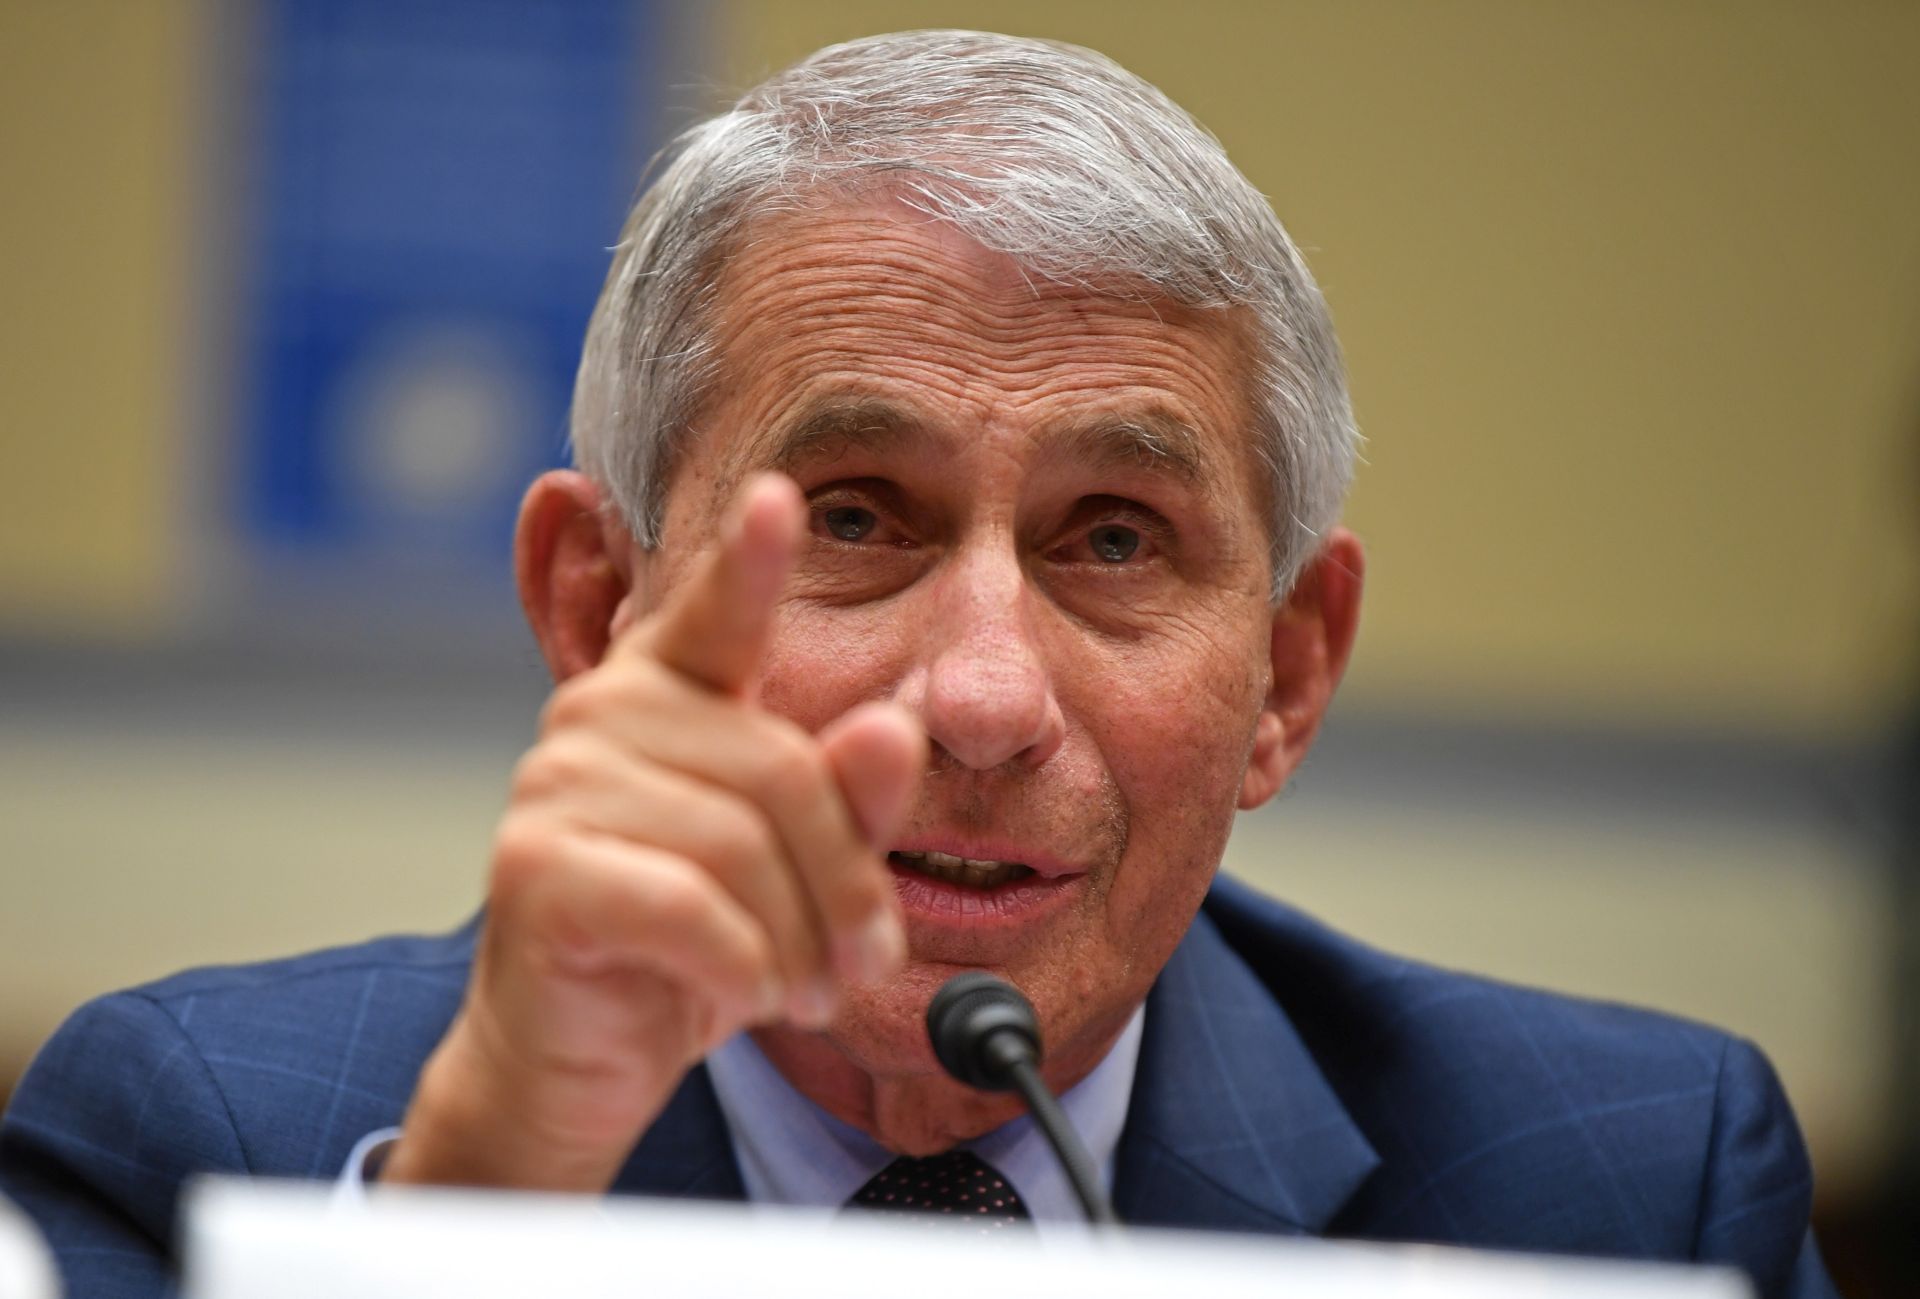 epa08577184 Dr. Anthony Fauci, director of the National Institute for Allergy and Infectious Diseases, testifies before a House Subcommittee on the Coronavirus Crisis hearing on a national plan to contain the COVID-19 pandemic on Capitol Hill in Washington DC, USA, 31 July 2020. The hearing is titled 'The Urgent Need for a National Plan to Contain the Coronavirus.'  EPA/KEVIN DIETSCH / POOL